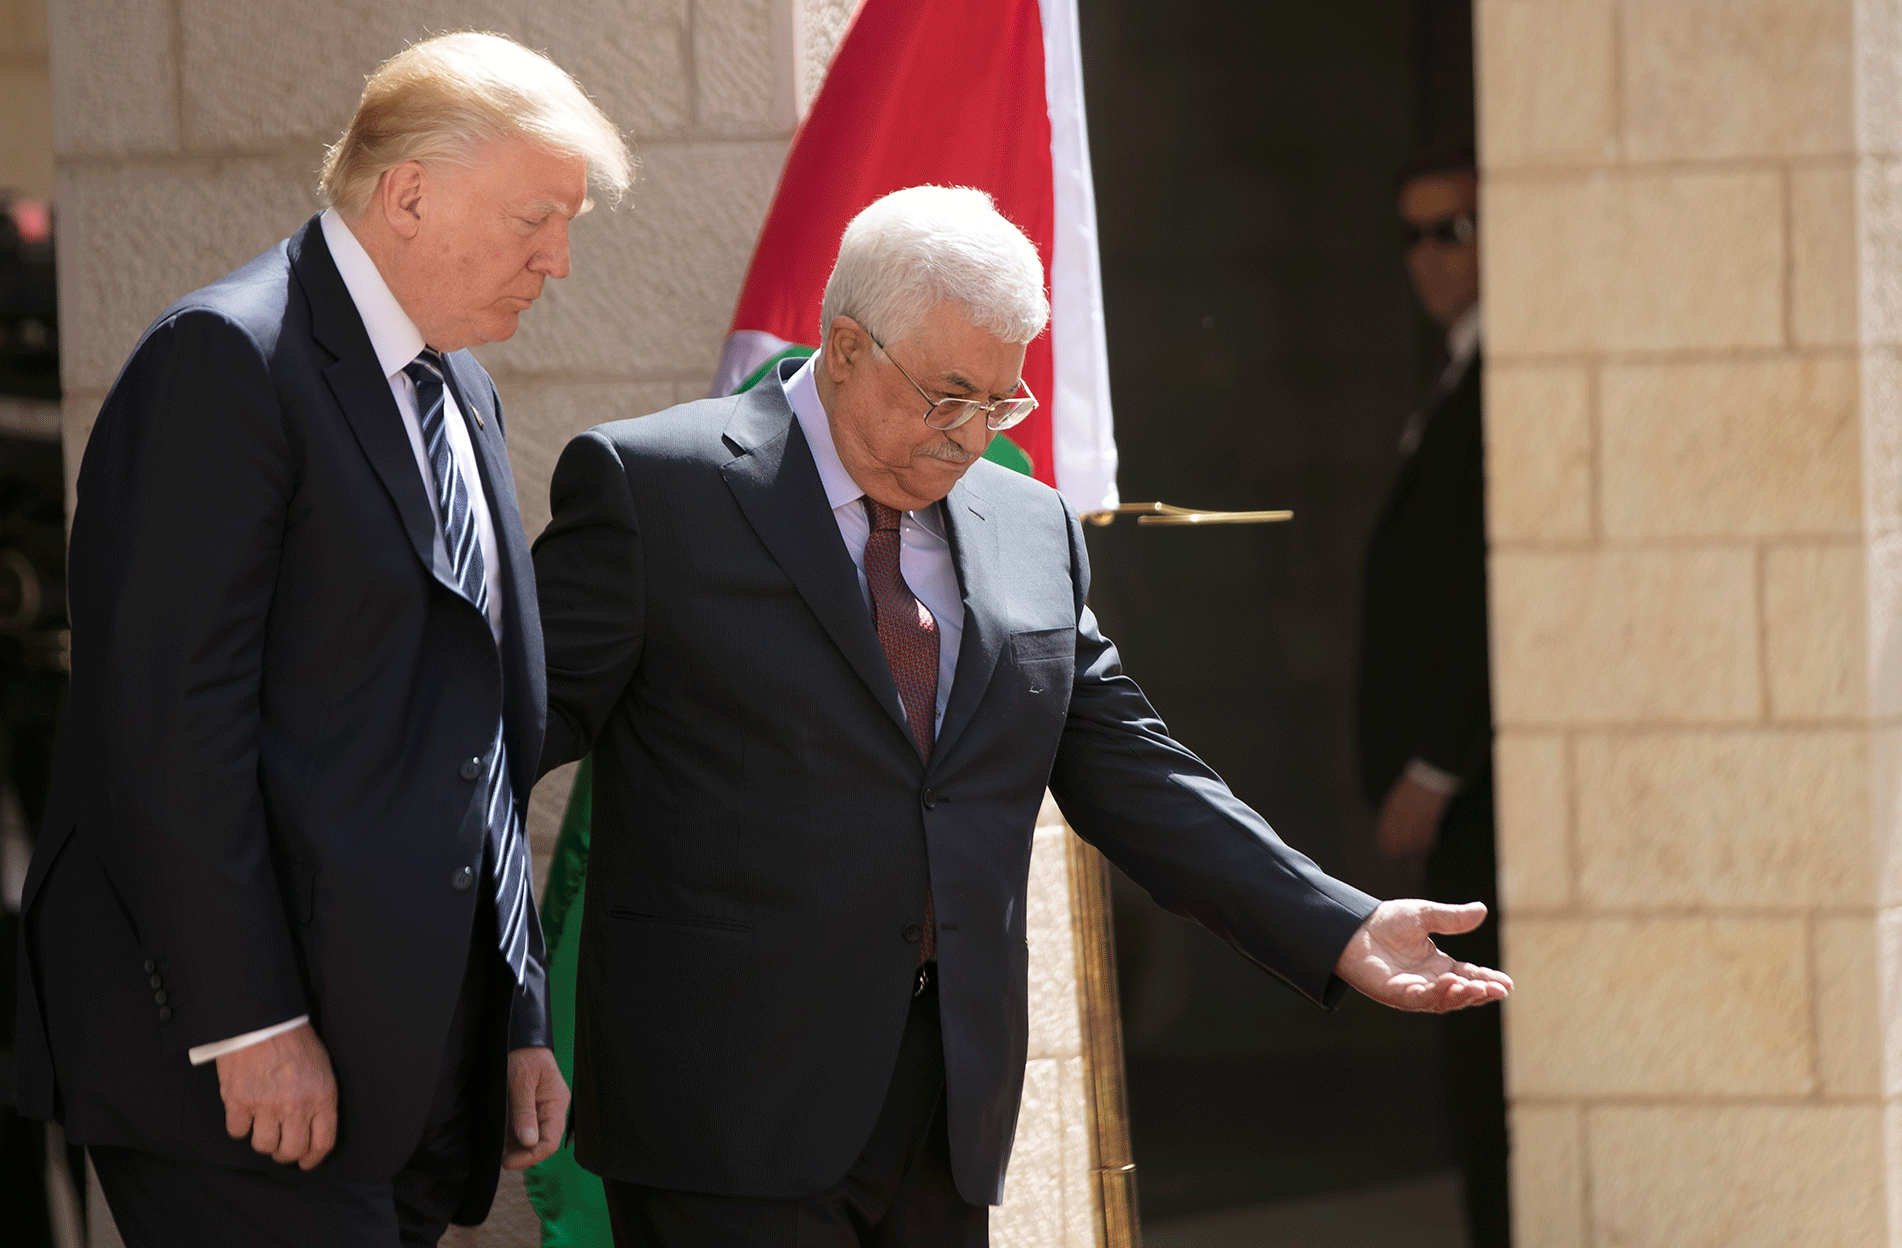 Palestinians Ask EU to ‘Counter’ US Peace Plan if it Ignores Statehood